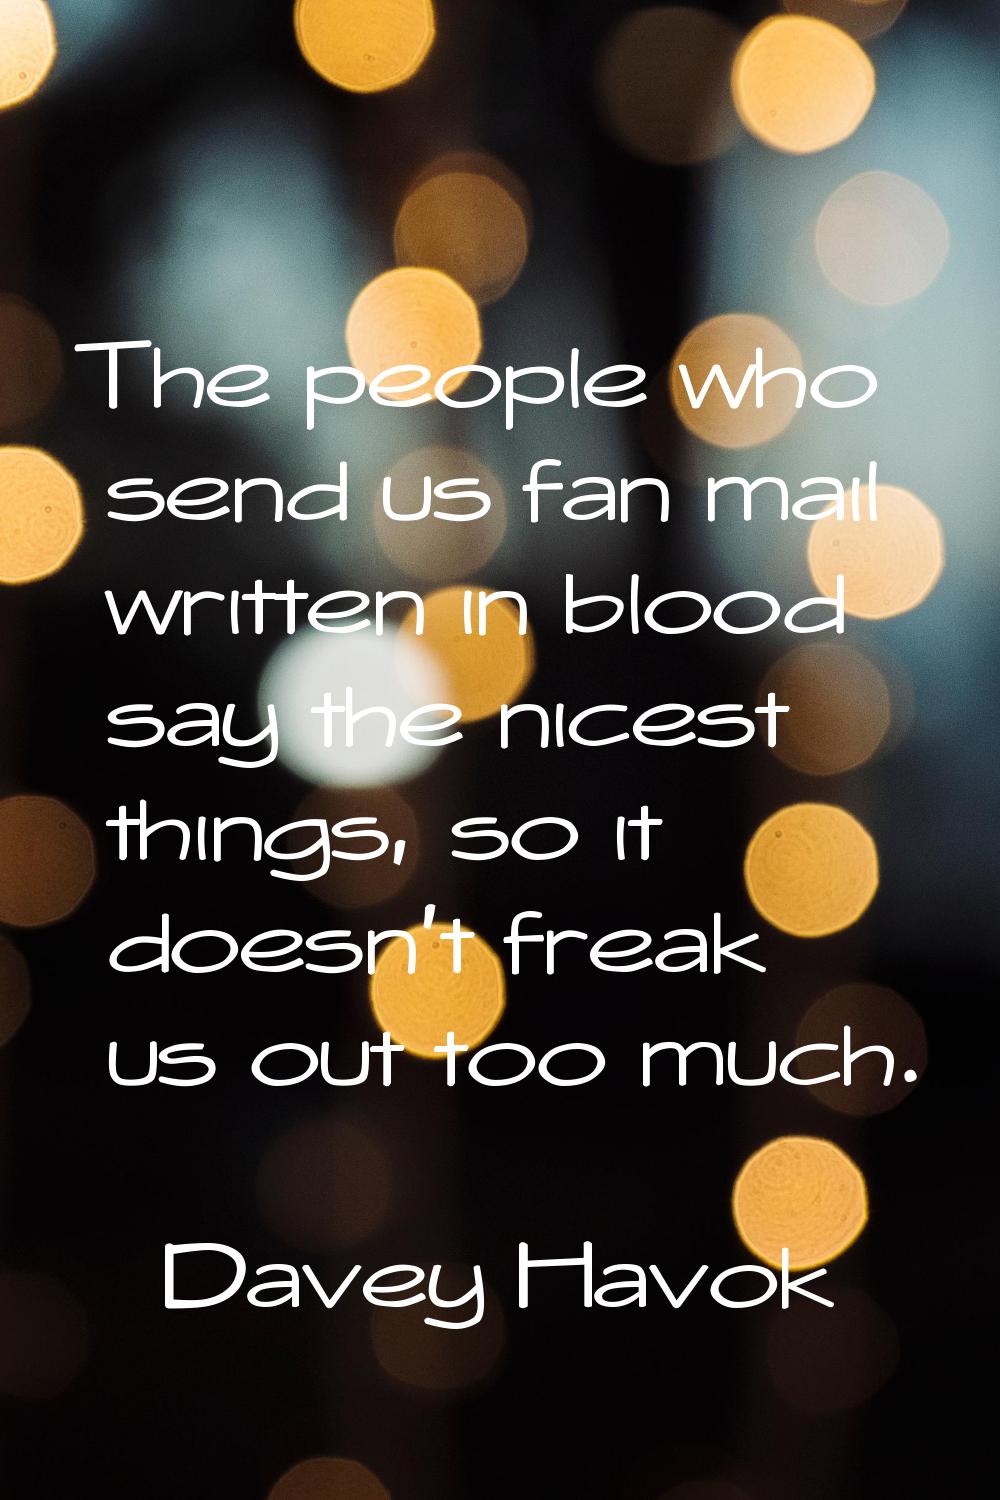 The people who send us fan mail written in blood say the nicest things, so it doesn't freak us out 